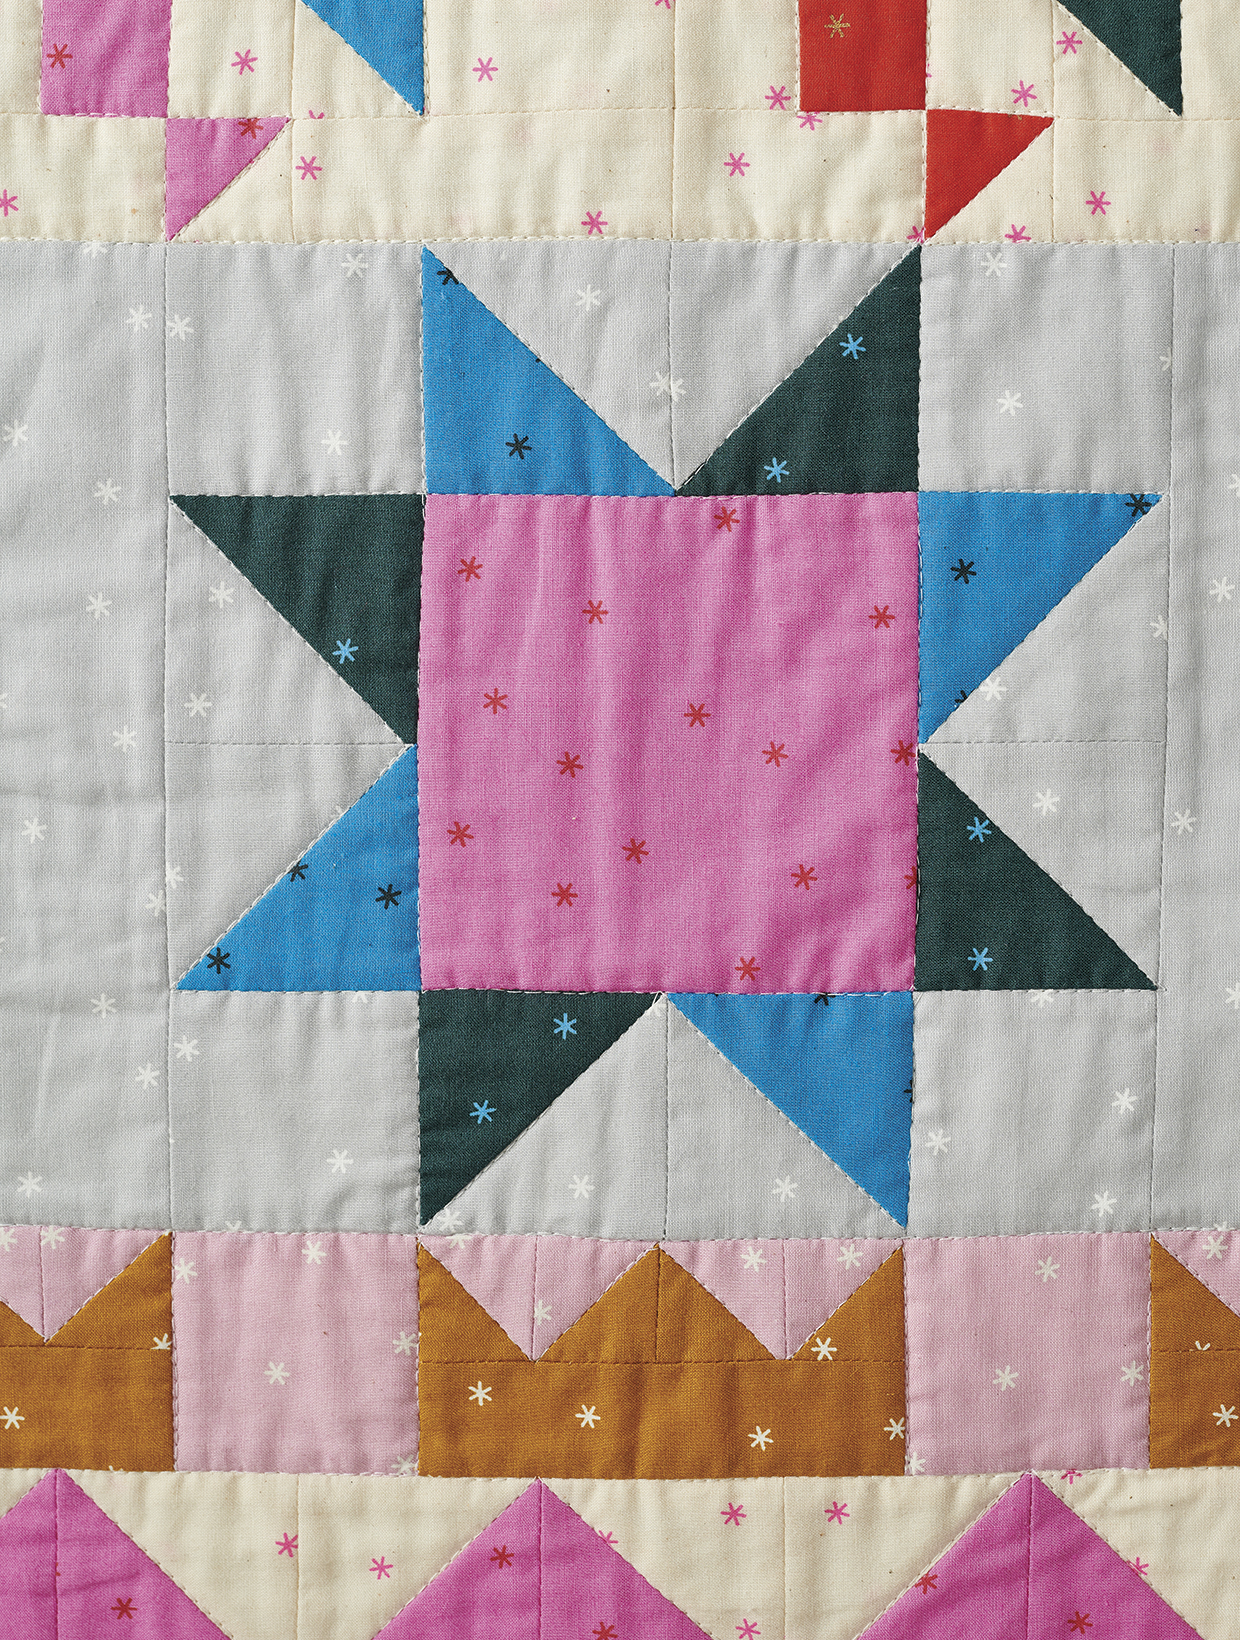 How to make a Christmas quilt star detail